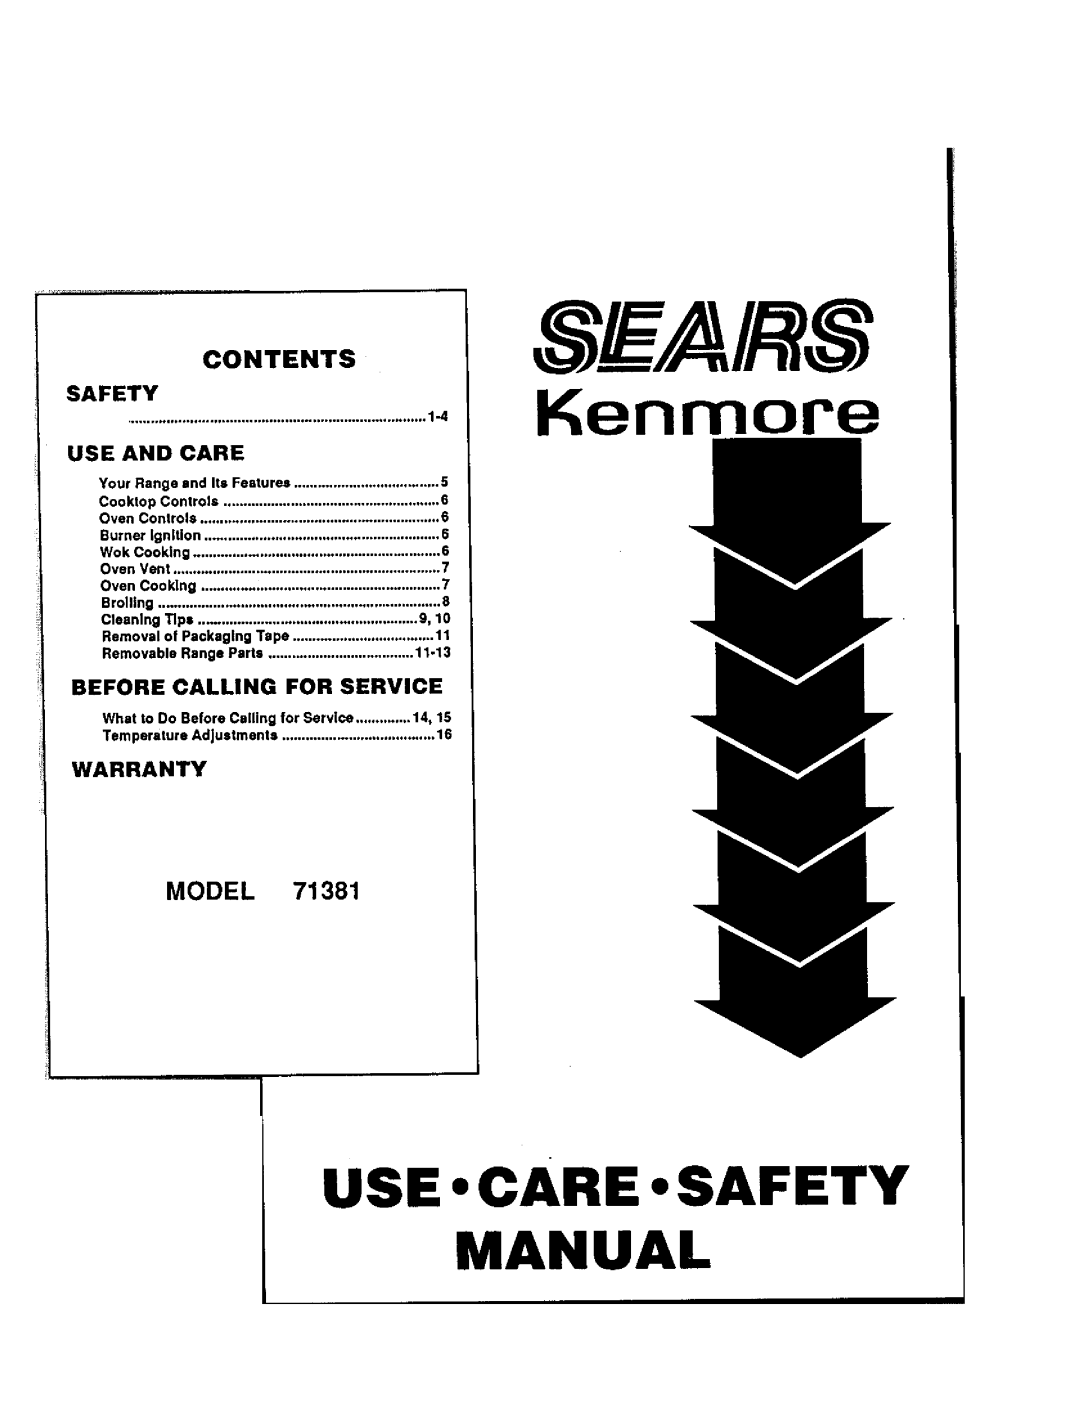 Sears 71381 warranty Manual, Contents, Model, Safety, Useandcare, Before, Calling, For Service, Warranty, Sears, Kenmore 